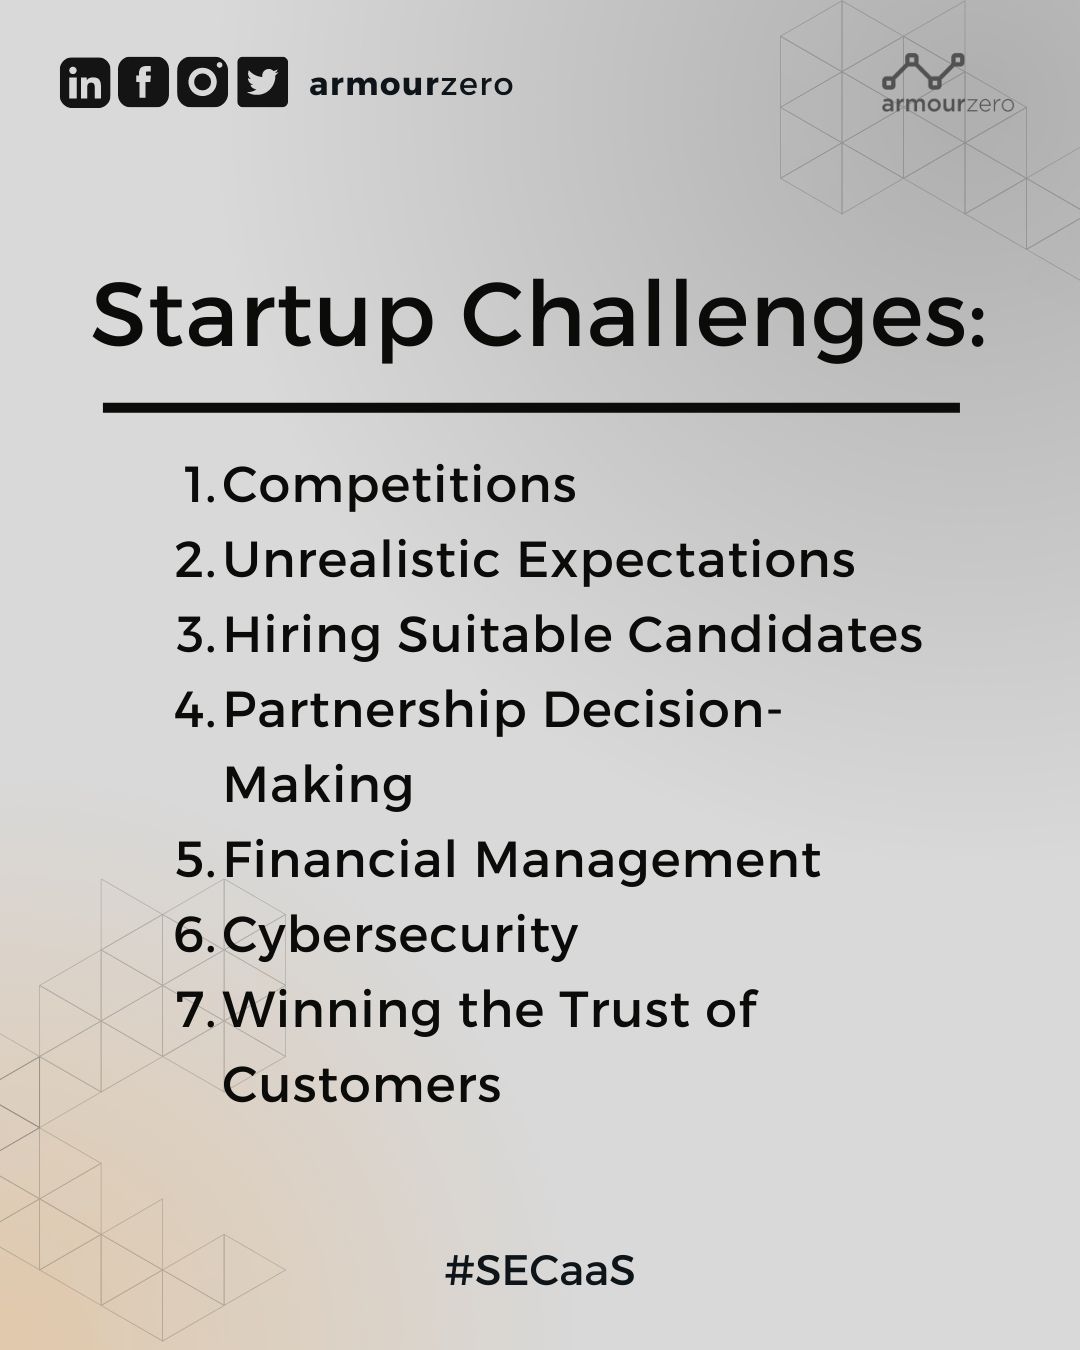 Struggle and challenges of cybersecurity startups - armourzero